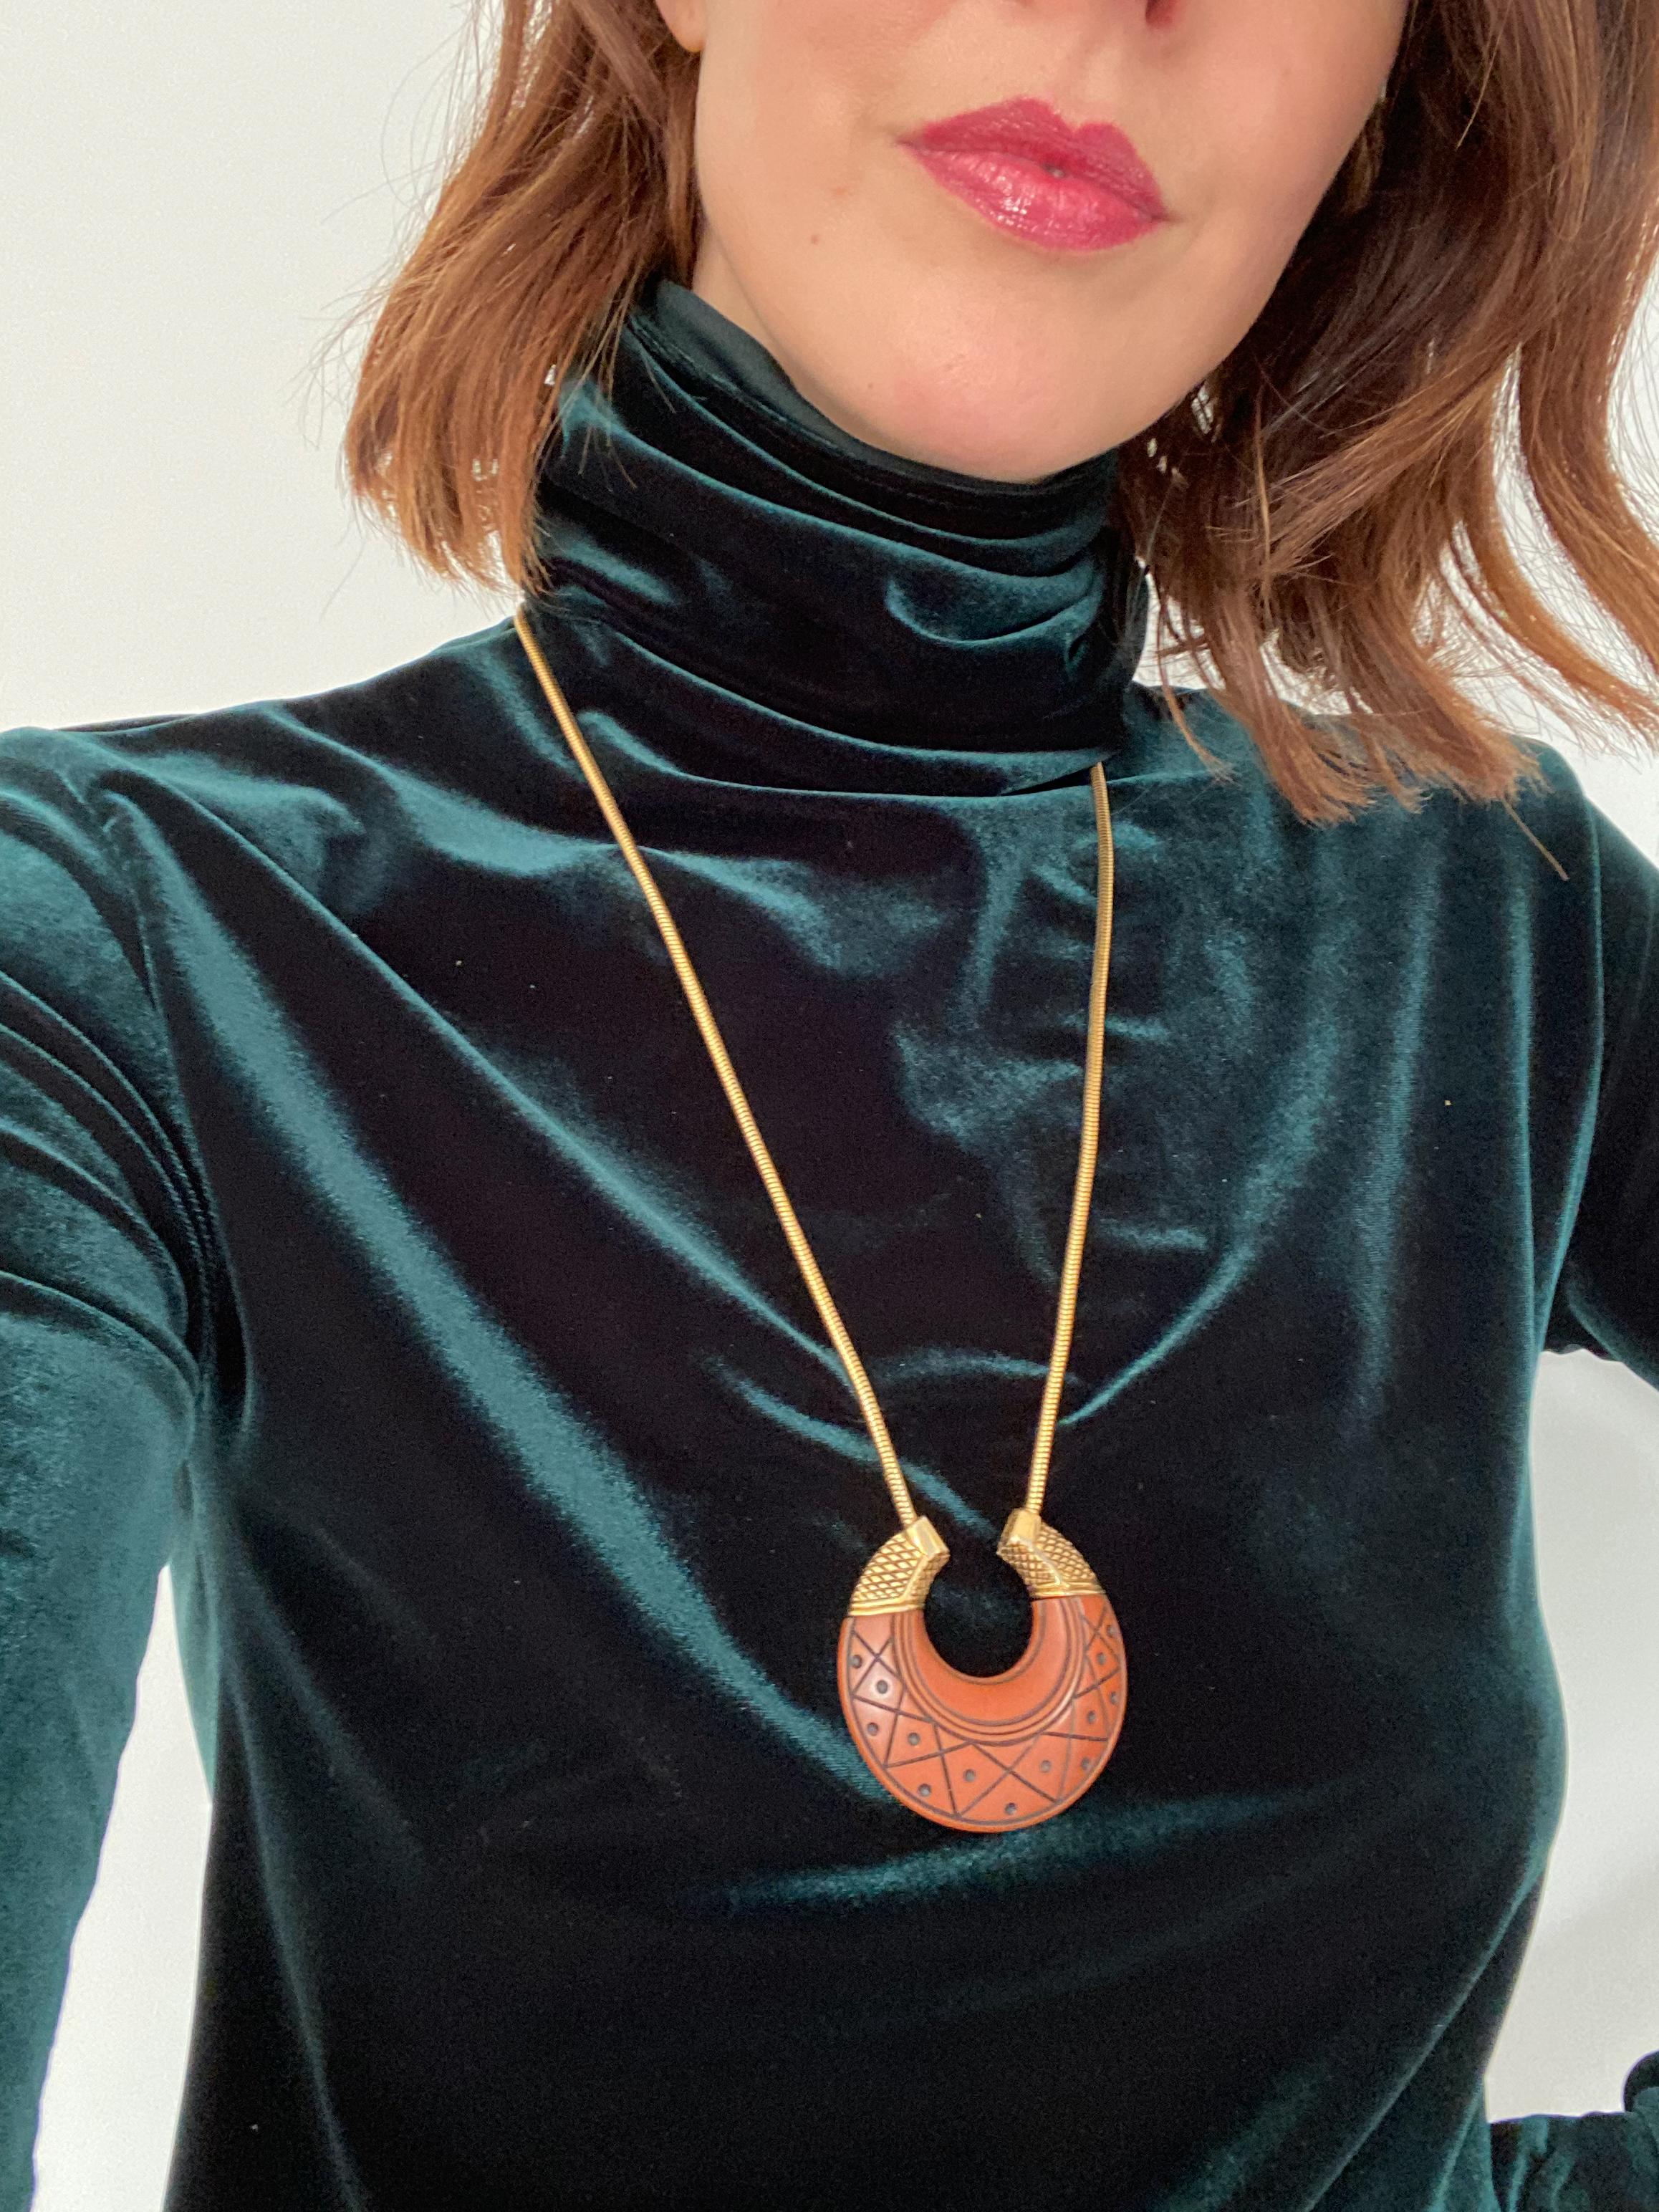 Givenchy 1970s Vintage Pendant Necklace. 

A rare ethnic inspired statement piece from the 1977 collection. A time when Givenchy quality and design was at it's best

Detail
-Made in France in 1977
-Chain crafted form high quality gold plated